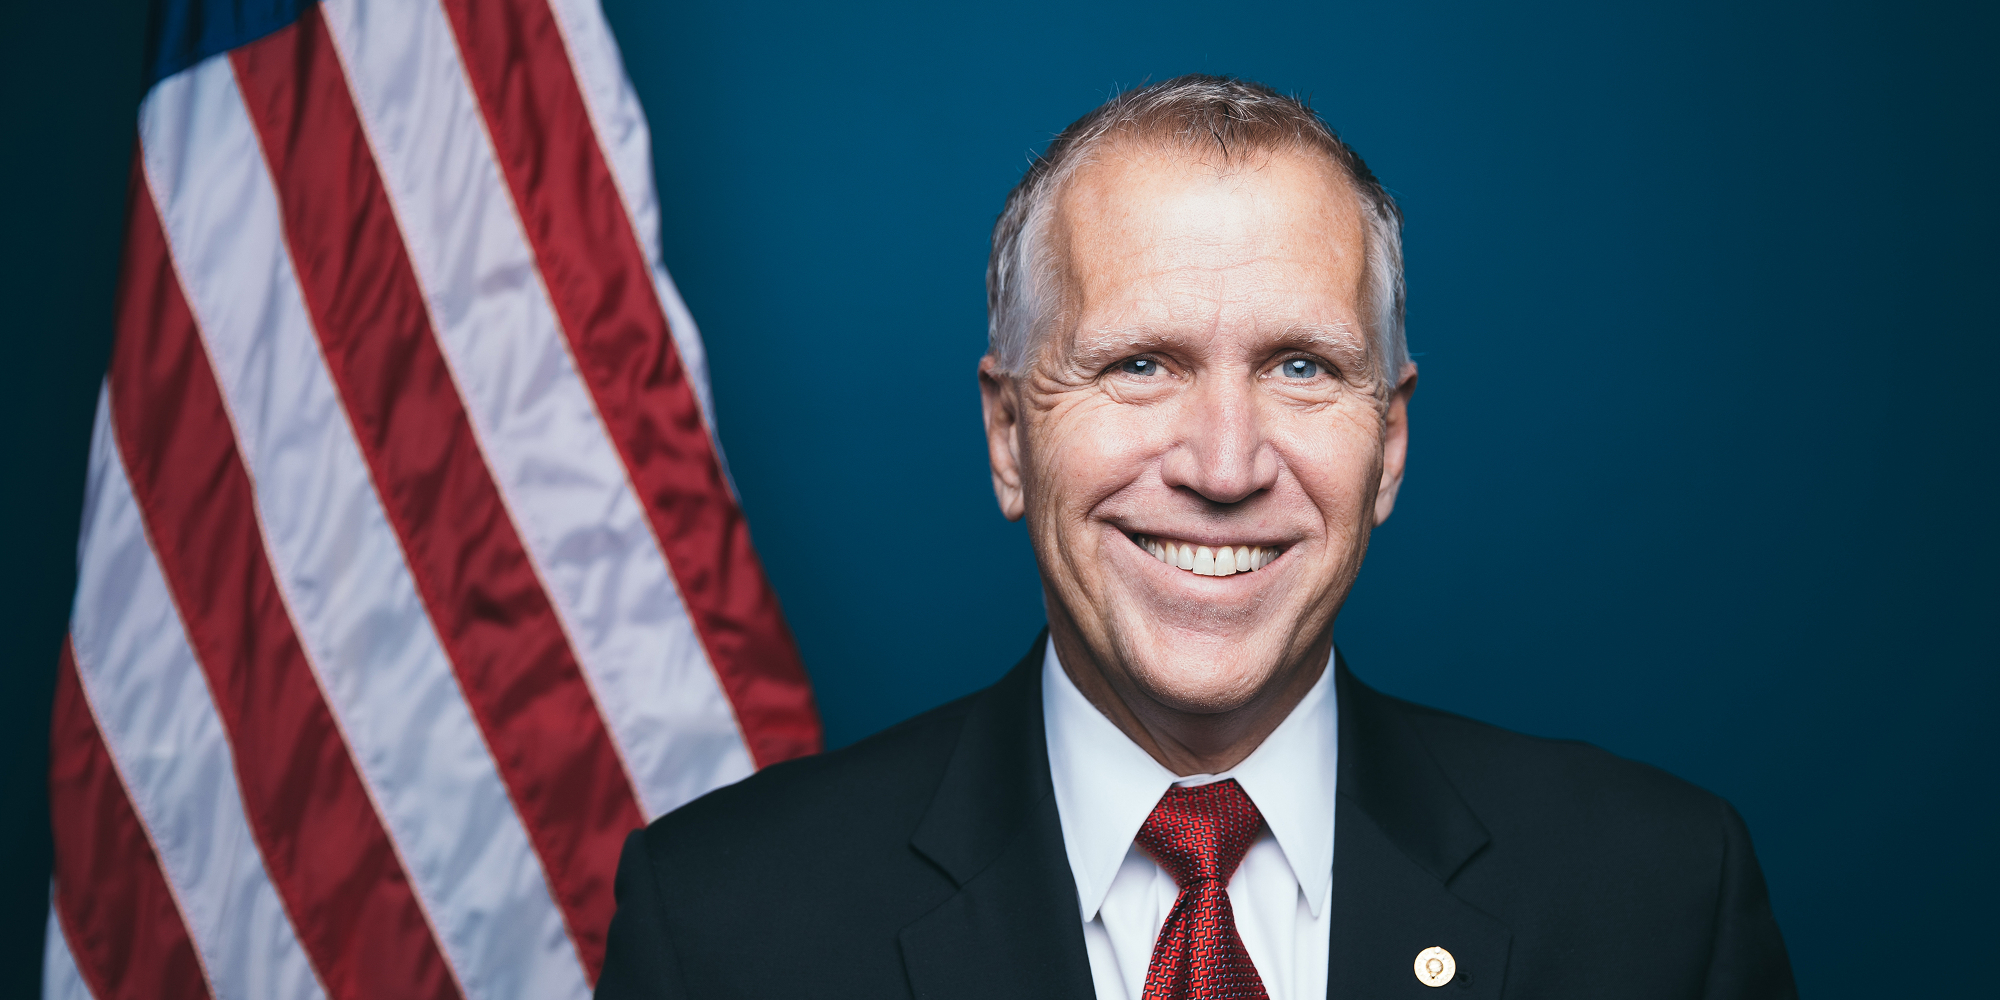 Tillis and colleagues introduce legislation to safeguard health care data from cyber attacks